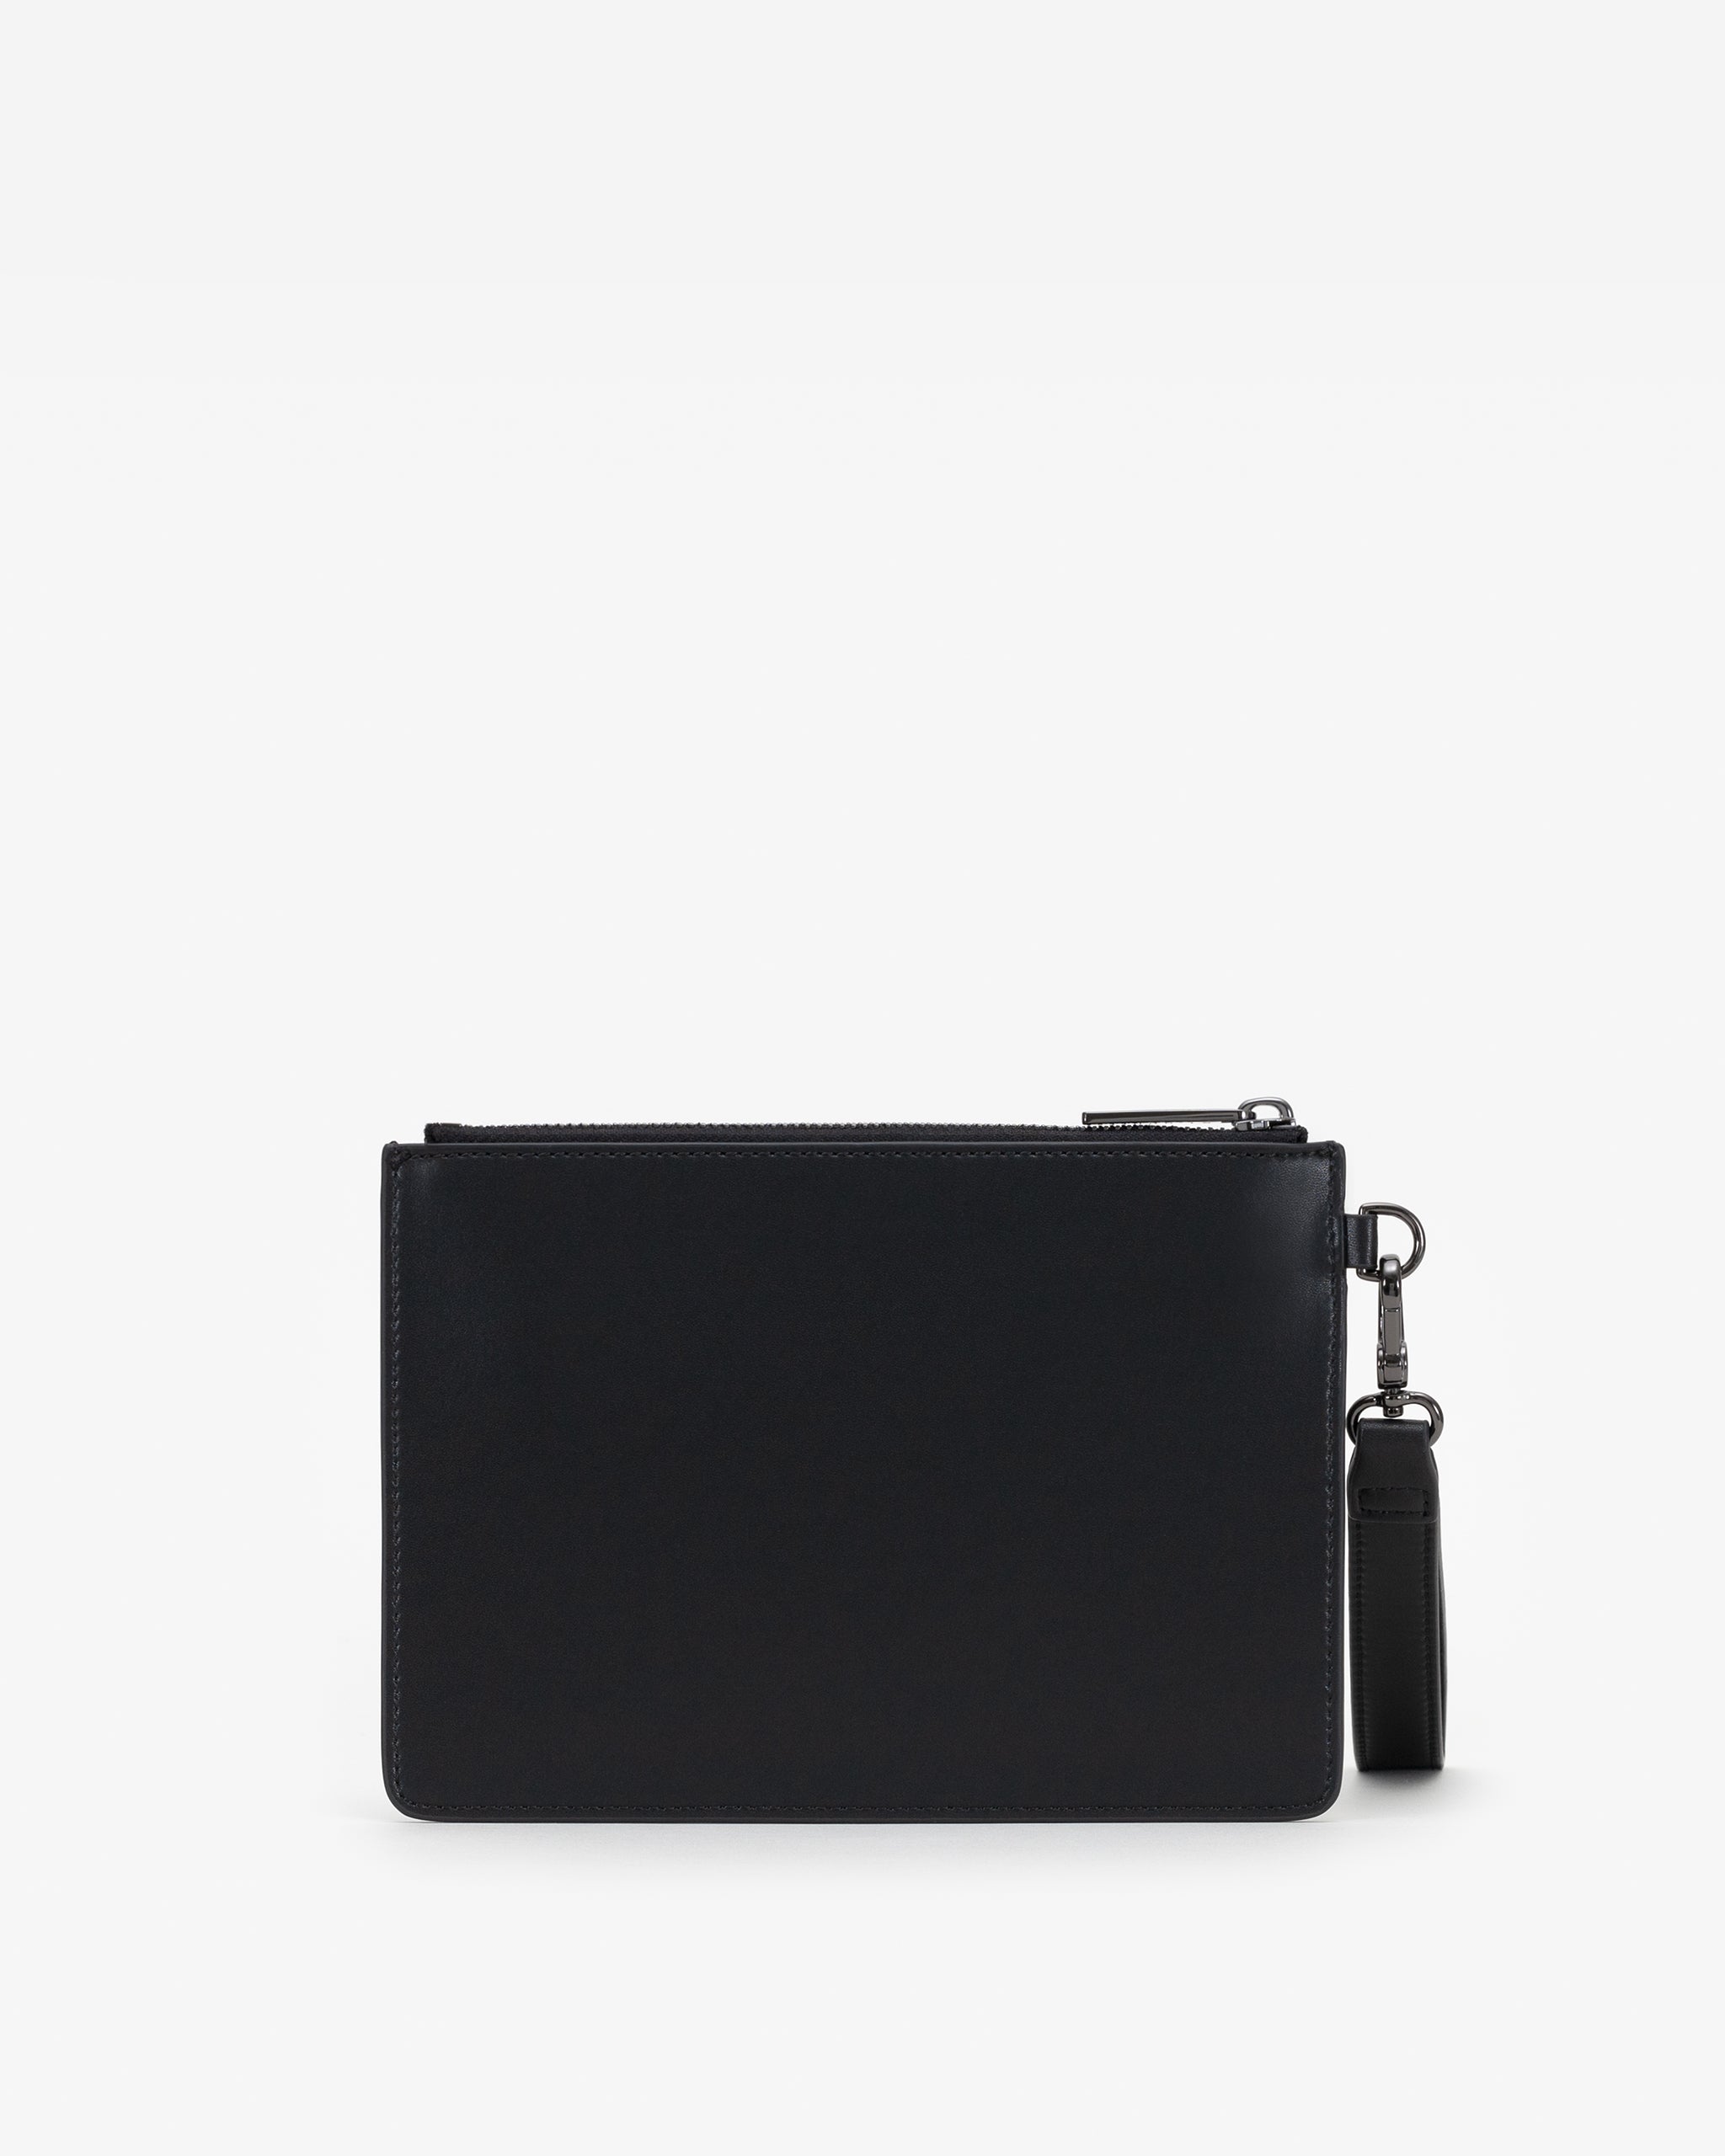 Classic Pouch in Black/Gunmetal with Personalised Hardware